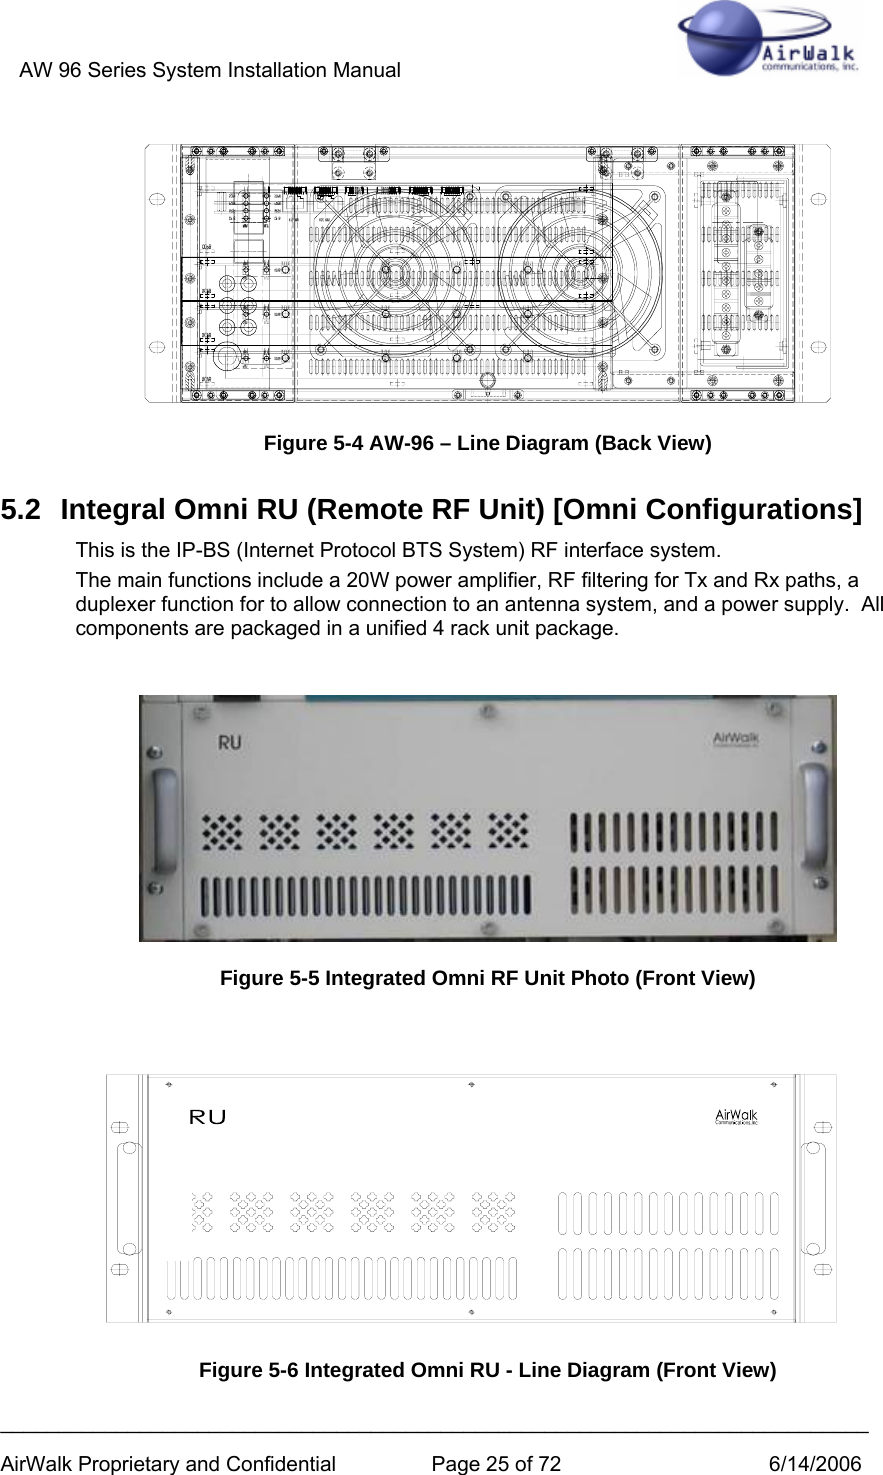 AW 96 Series System Installation Manual          ___________________________________________________________________________ AirWalk Proprietary and Confidential  Page 25 of 72  6/14/2006   Figure 5-4 AW-96 – Line Diagram (Back View) 5.2  Integral Omni RU (Remote RF Unit) [Omni Configurations] This is the IP-BS (Internet Protocol BTS System) RF interface system. The main functions include a 20W power amplifier, RF filtering for Tx and Rx paths, a duplexer function for to allow connection to an antenna system, and a power supply.  All components are packaged in a unified 4 rack unit package.   Figure 5-5 Integrated Omni RF Unit Photo (Front View)   Figure 5-6 Integrated Omni RU - Line Diagram (Front View) 